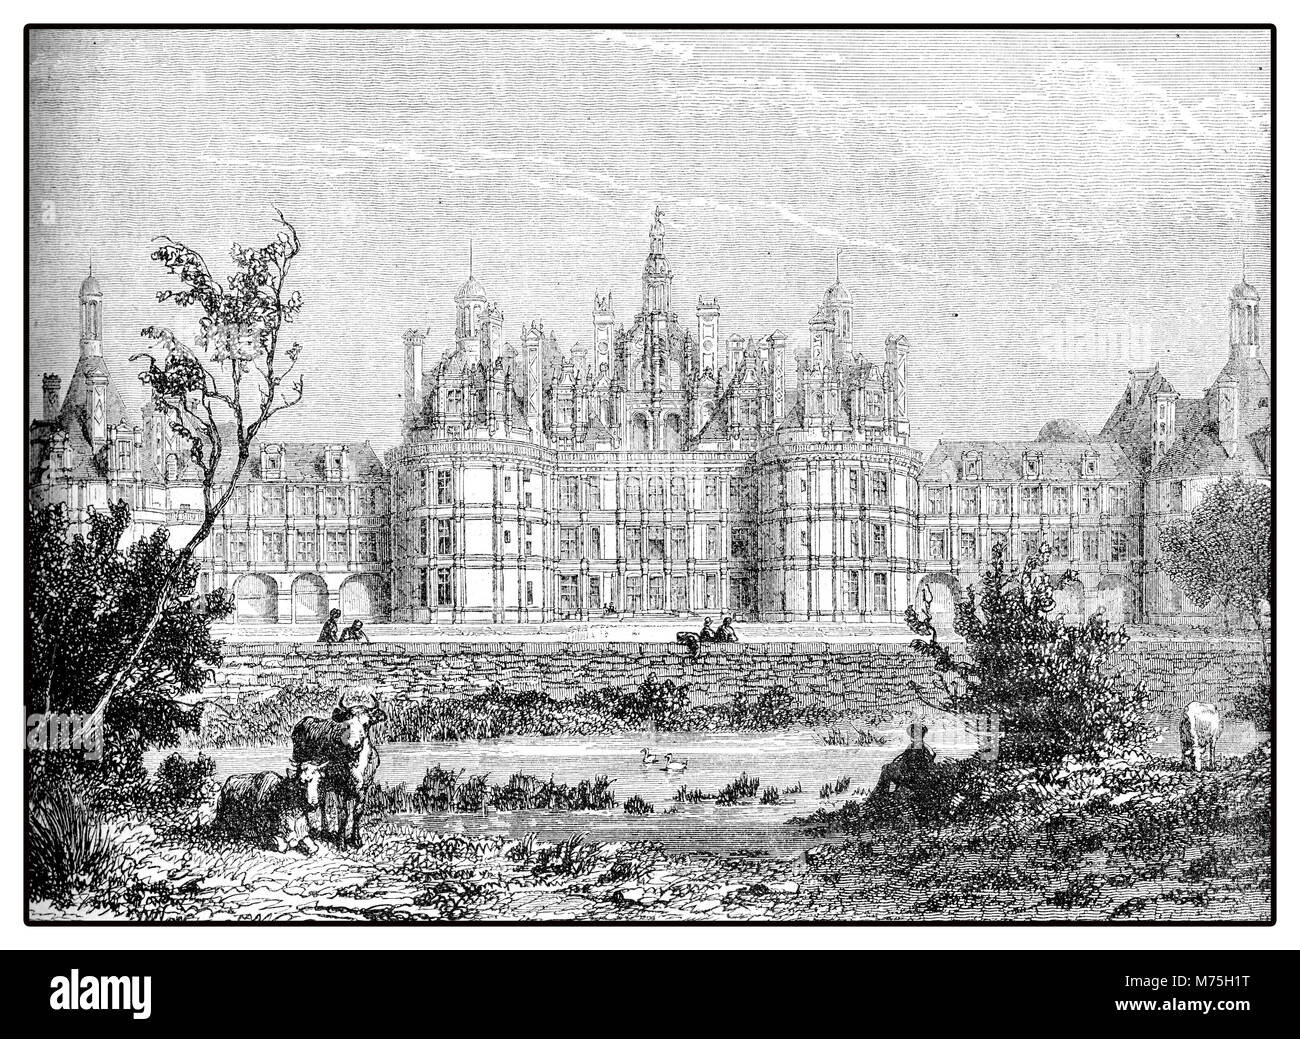 Vintage engraving of Château de Chambord at Chambord Loir-et-Cher, France.  Built in XVI century is one of the most recognizable châteaux in its very  distinctive French Renaissance architecture Stock Photo - Alamy